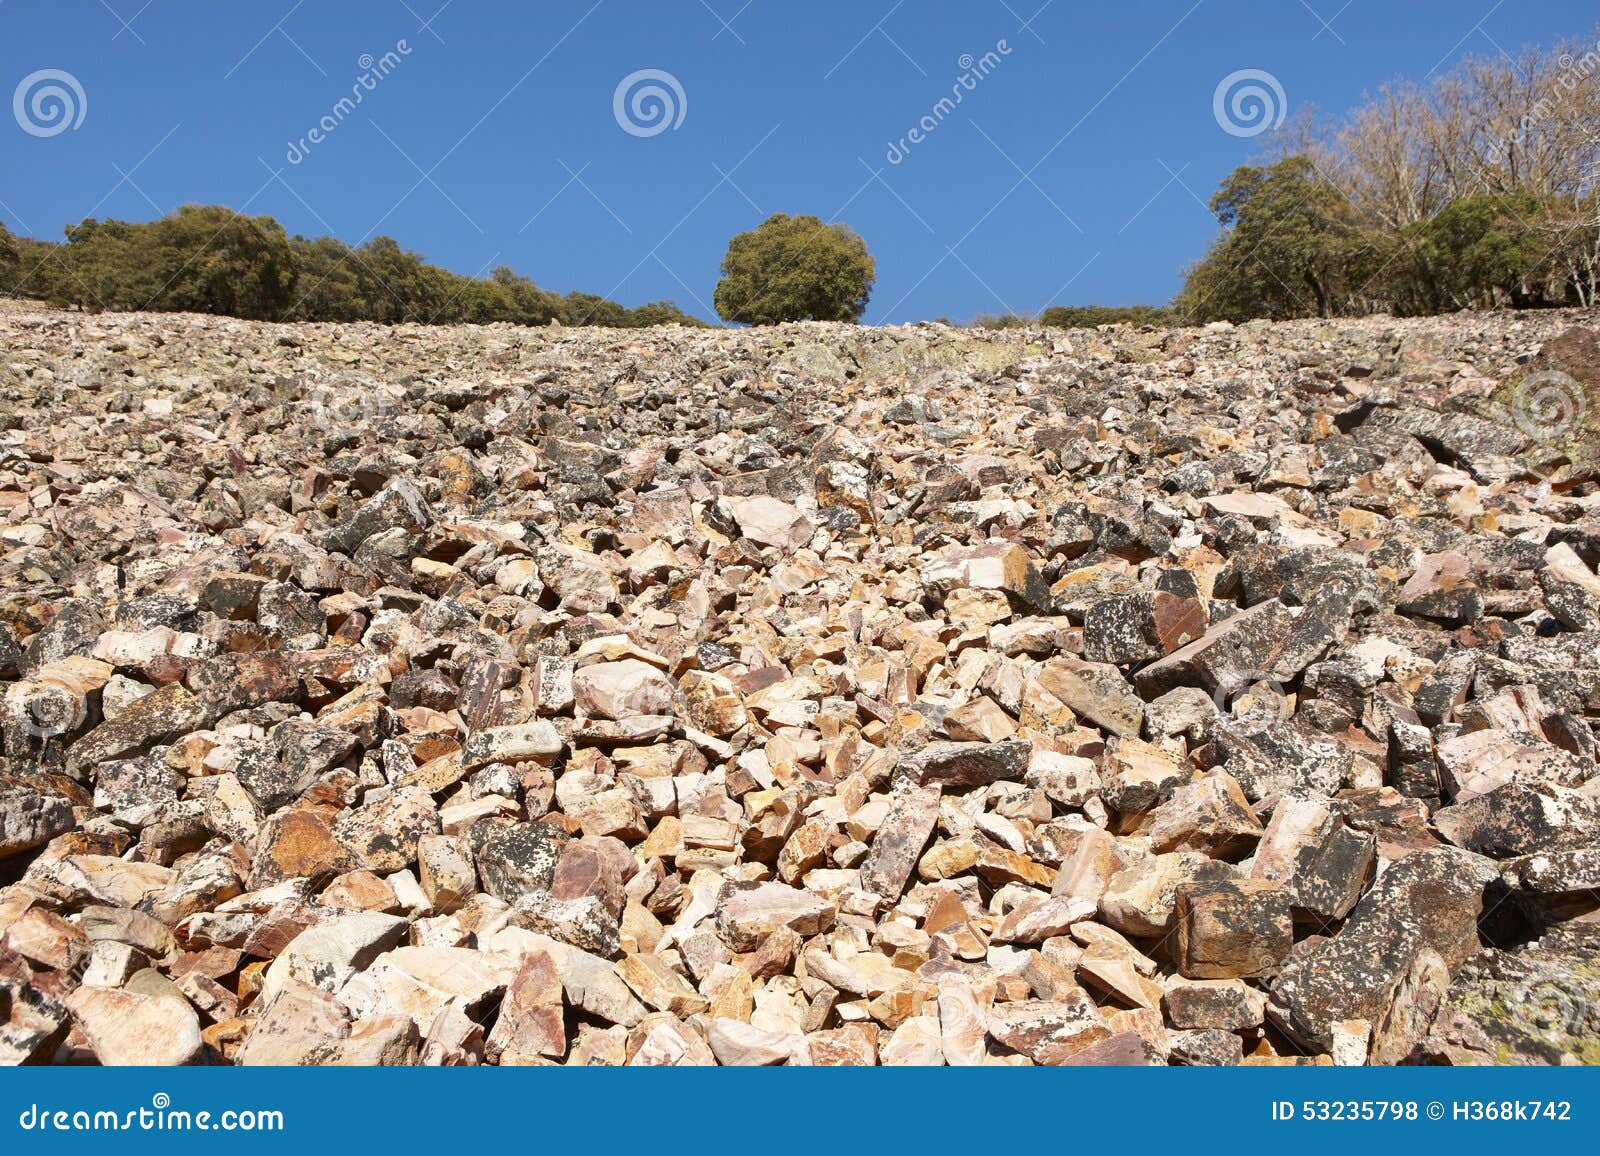 landscape with rocky ground and trees in cabaneros, spain